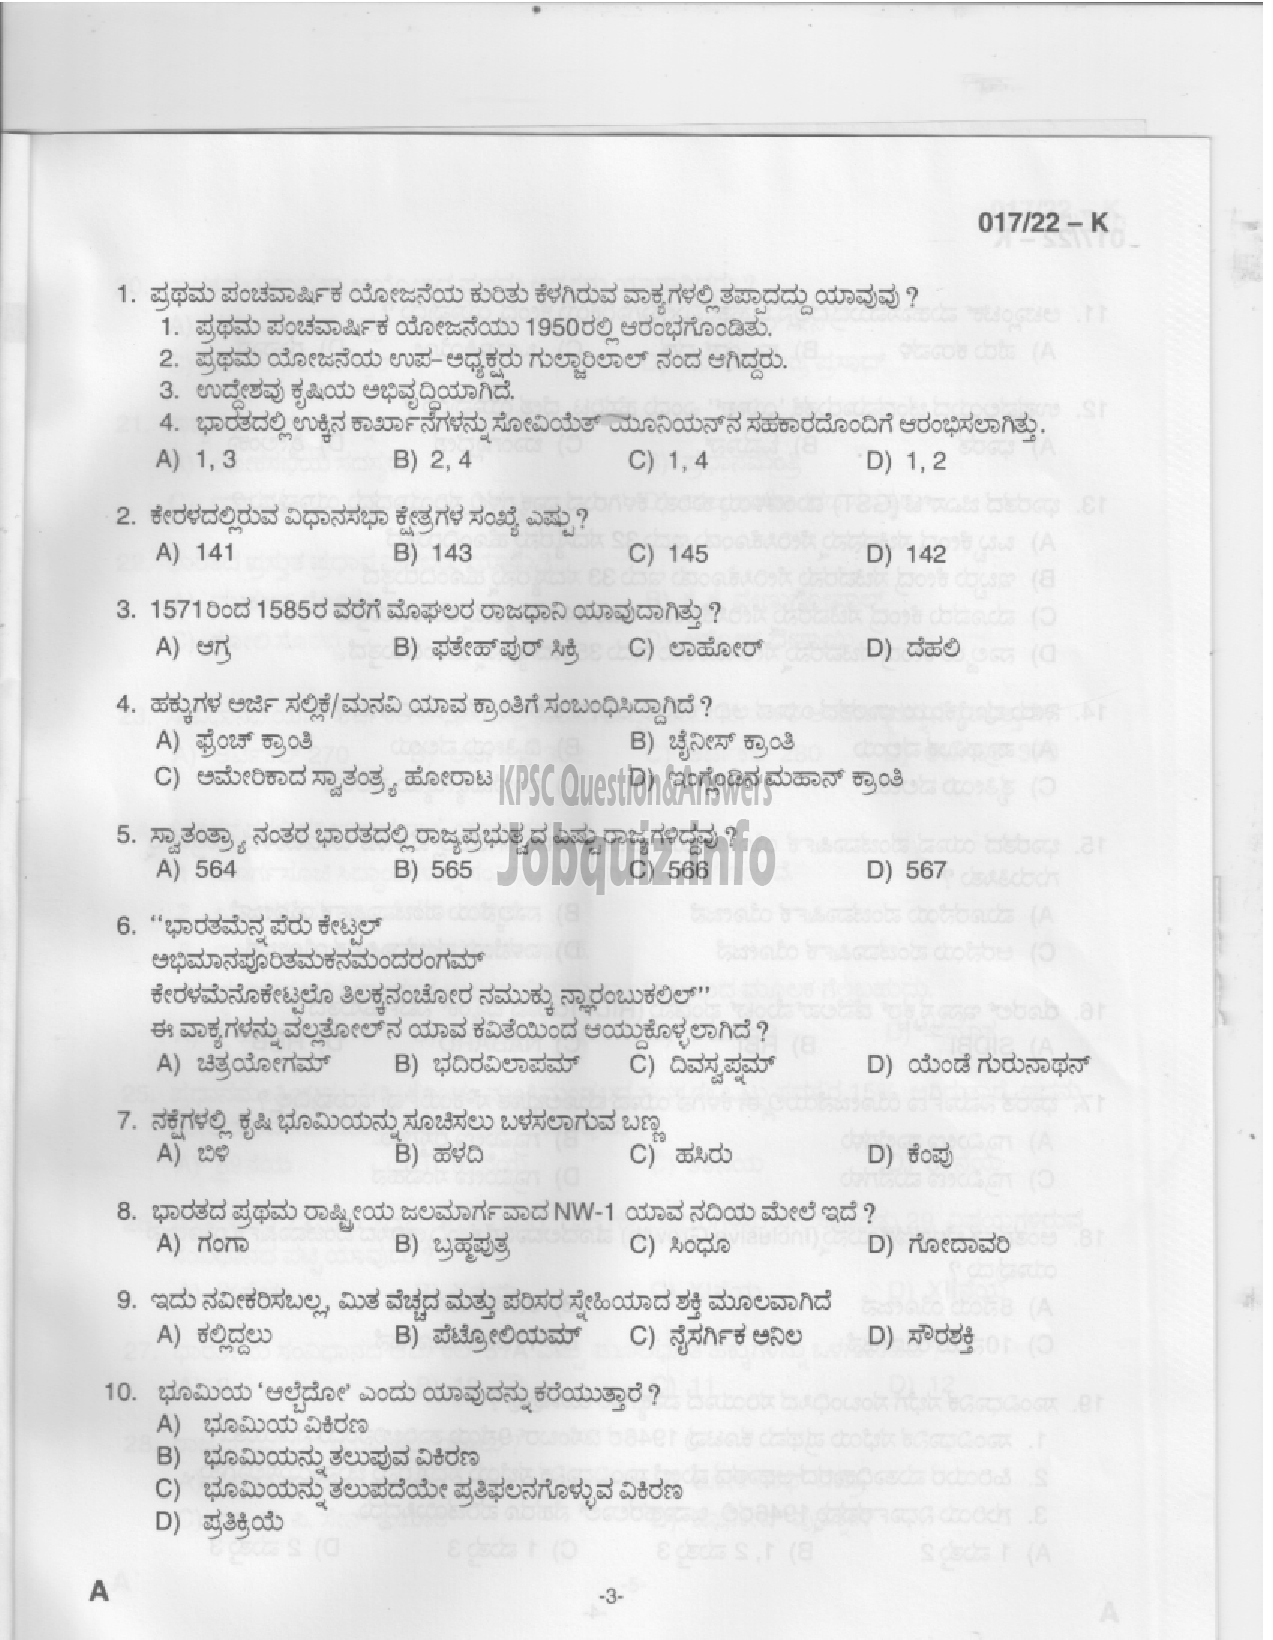 Kerala PSC Question Paper -  Police Constable, Women Police Constable, Armed Police ASI etc-POLICE DEPARTMENT  -1